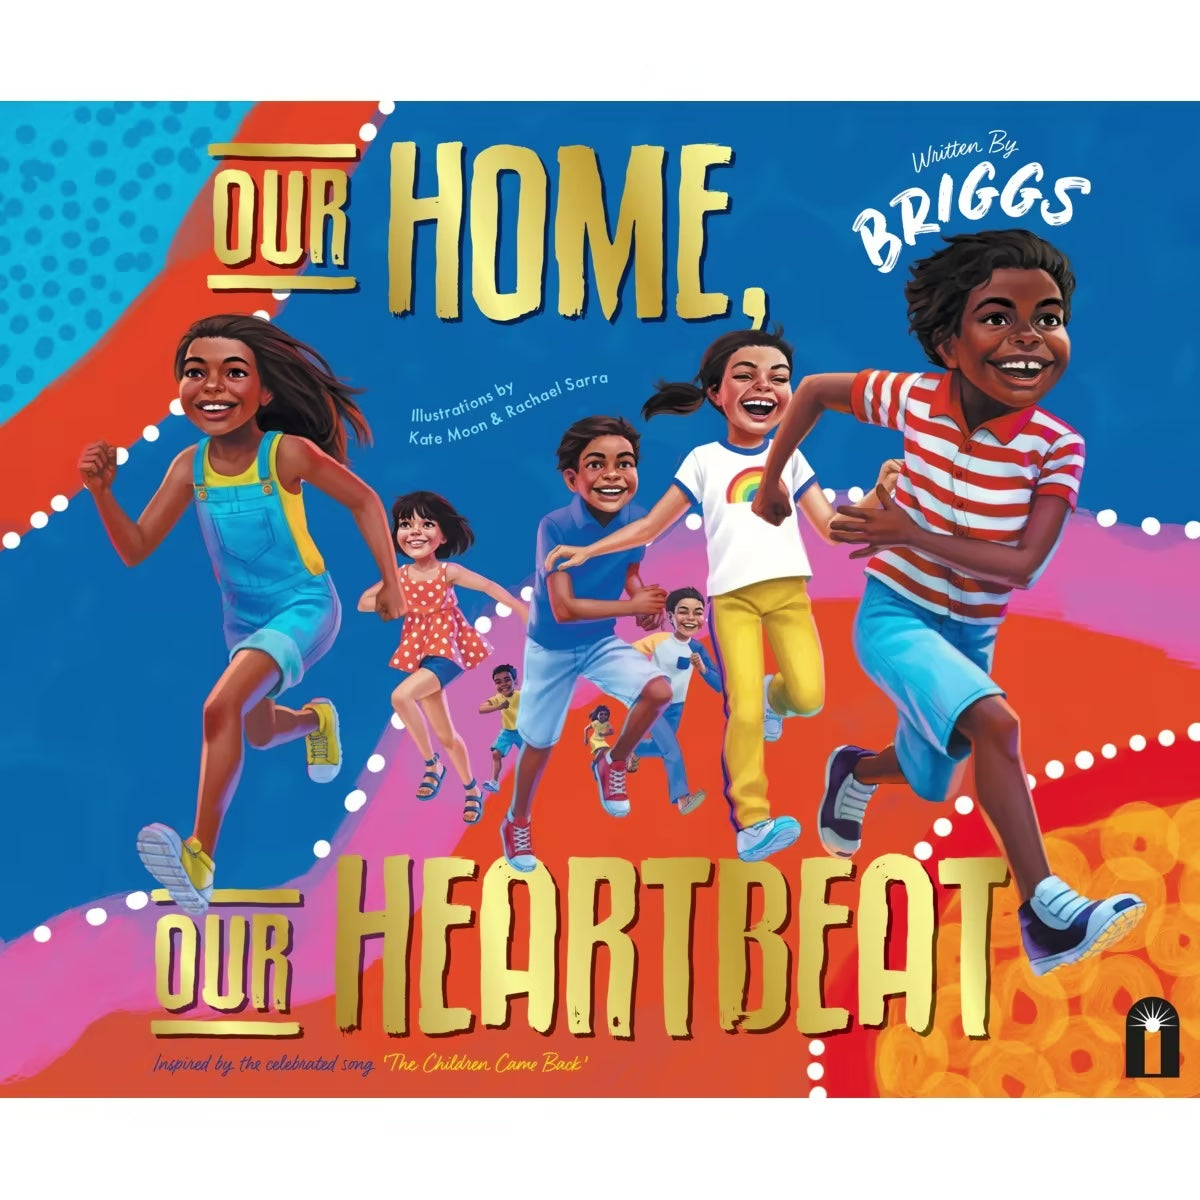 Children's Book - Our Home, Our Heartbeat by Adam Briggs